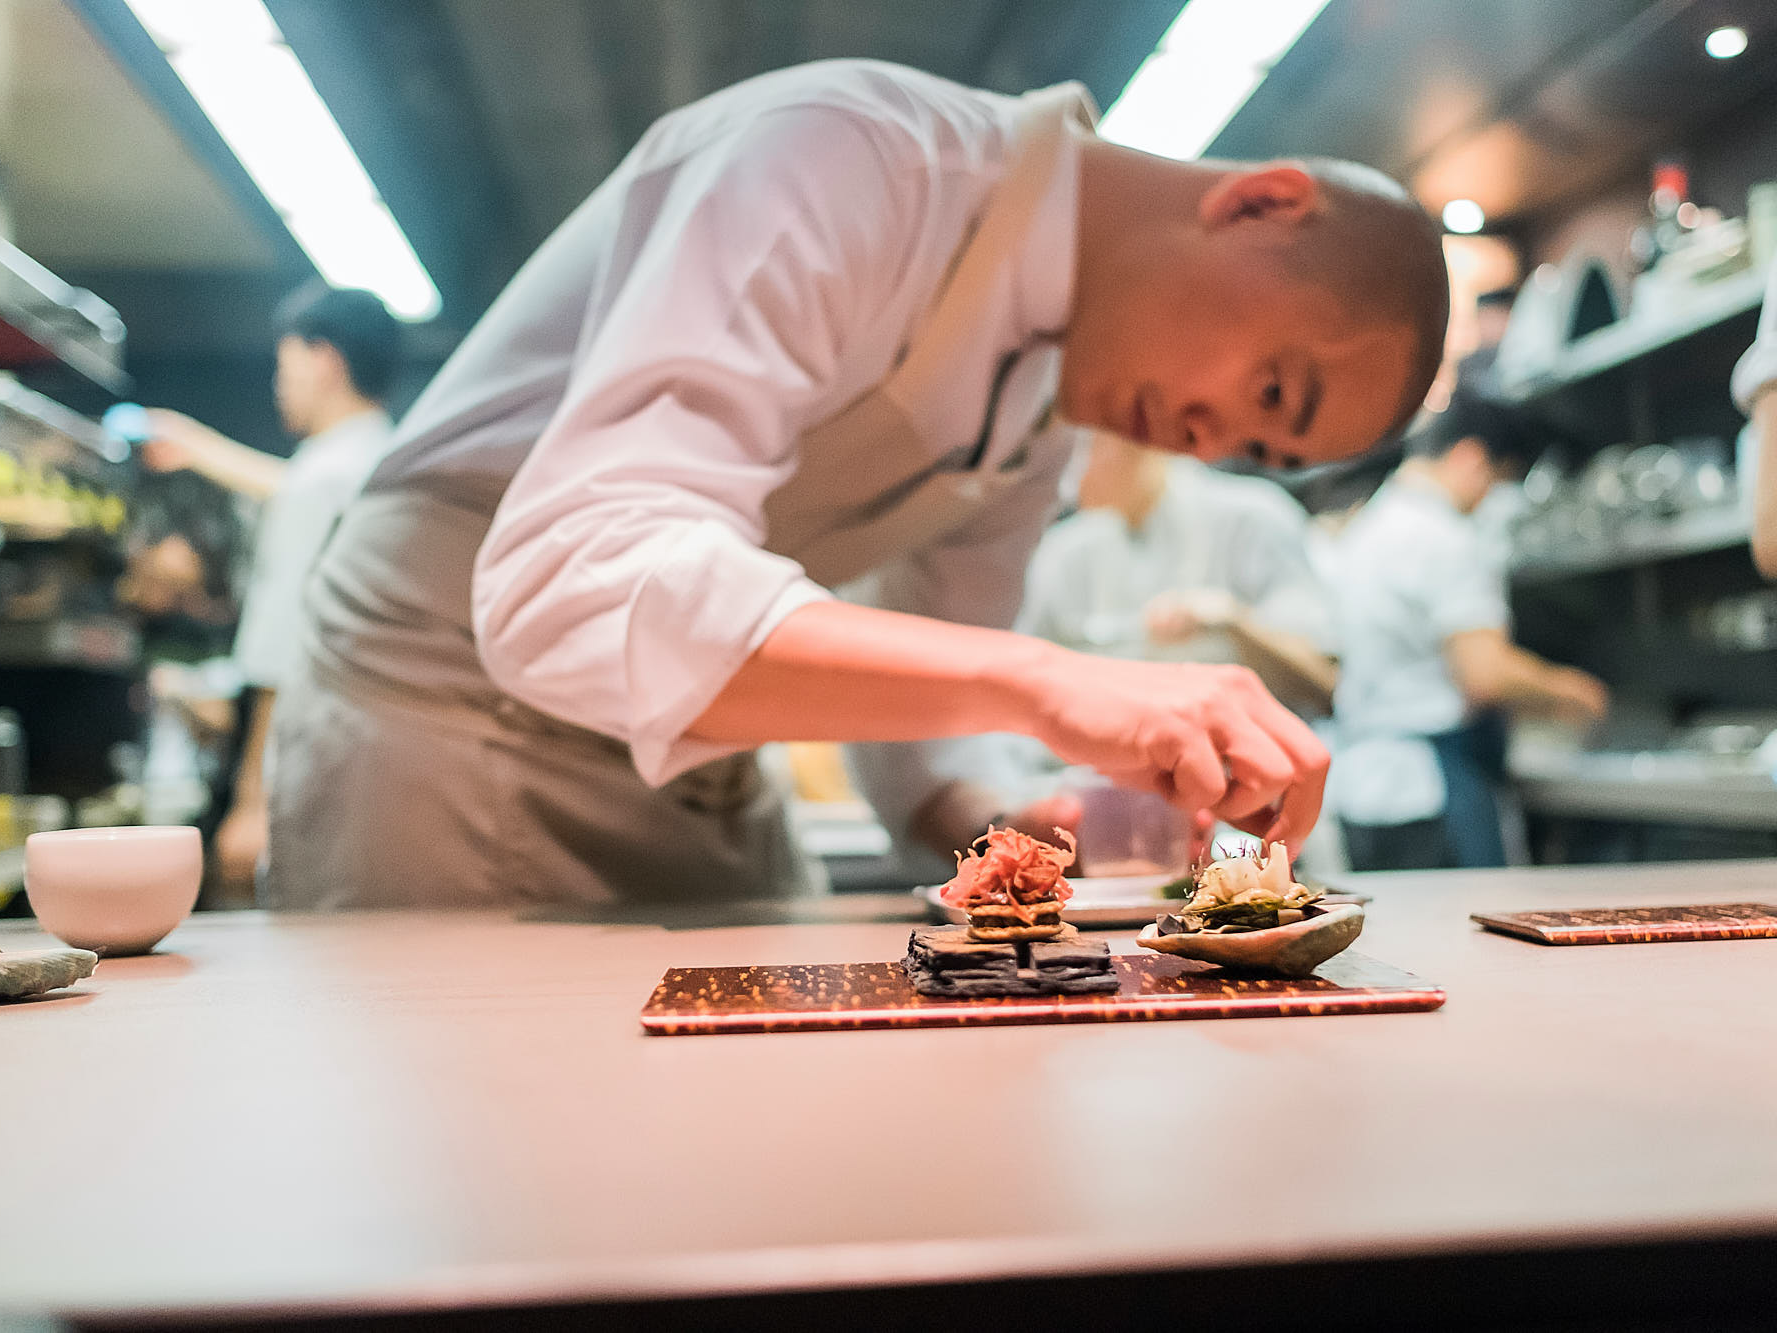 Chef Andre Chiang bending over a dish in his kitchen in Singapore to garnish a dish.